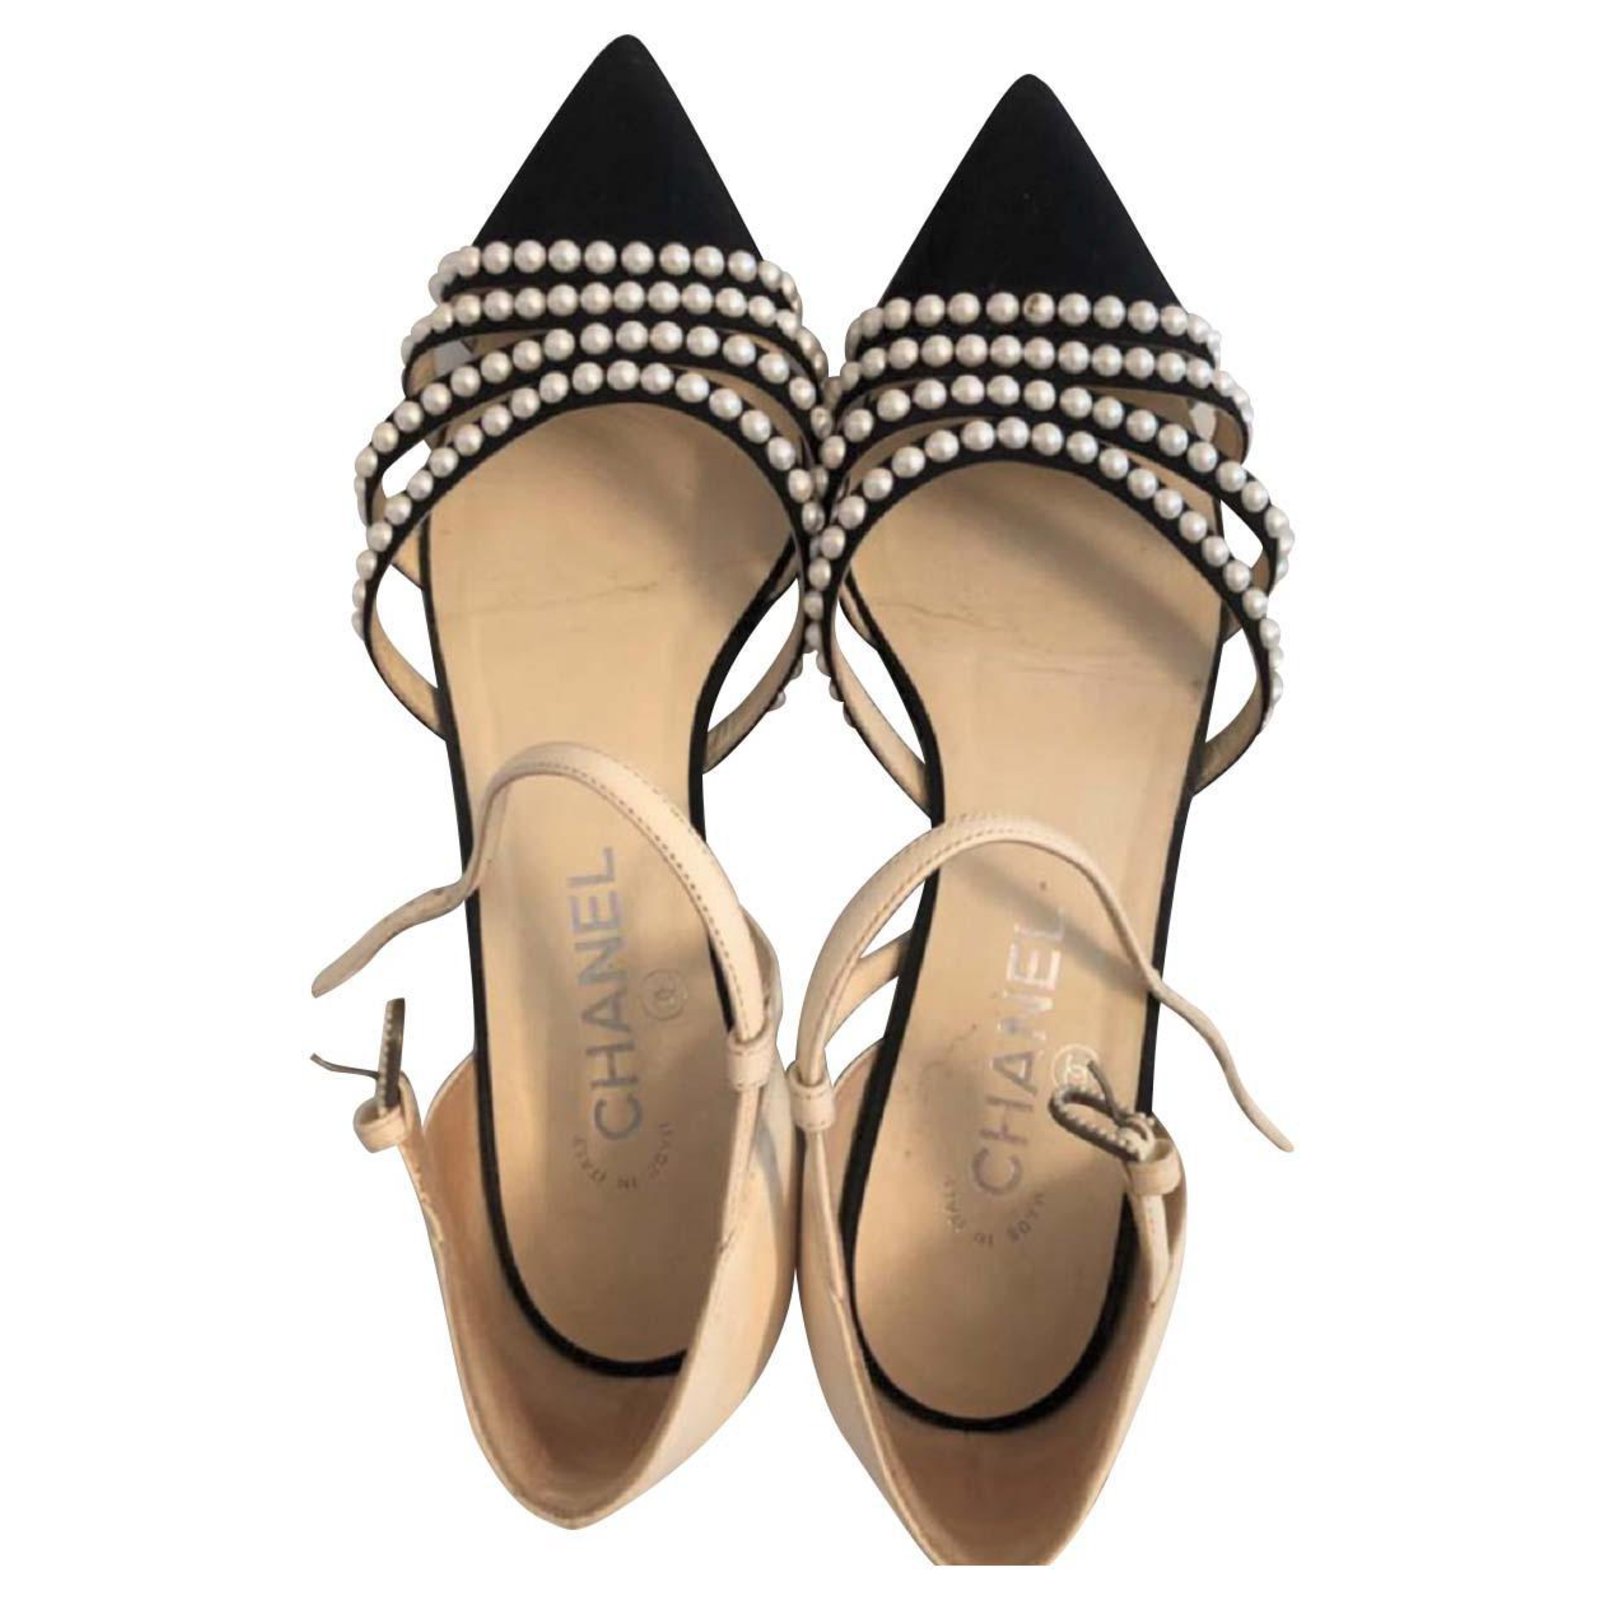 Chanel BlackWhite Pumps With Pearl Detail